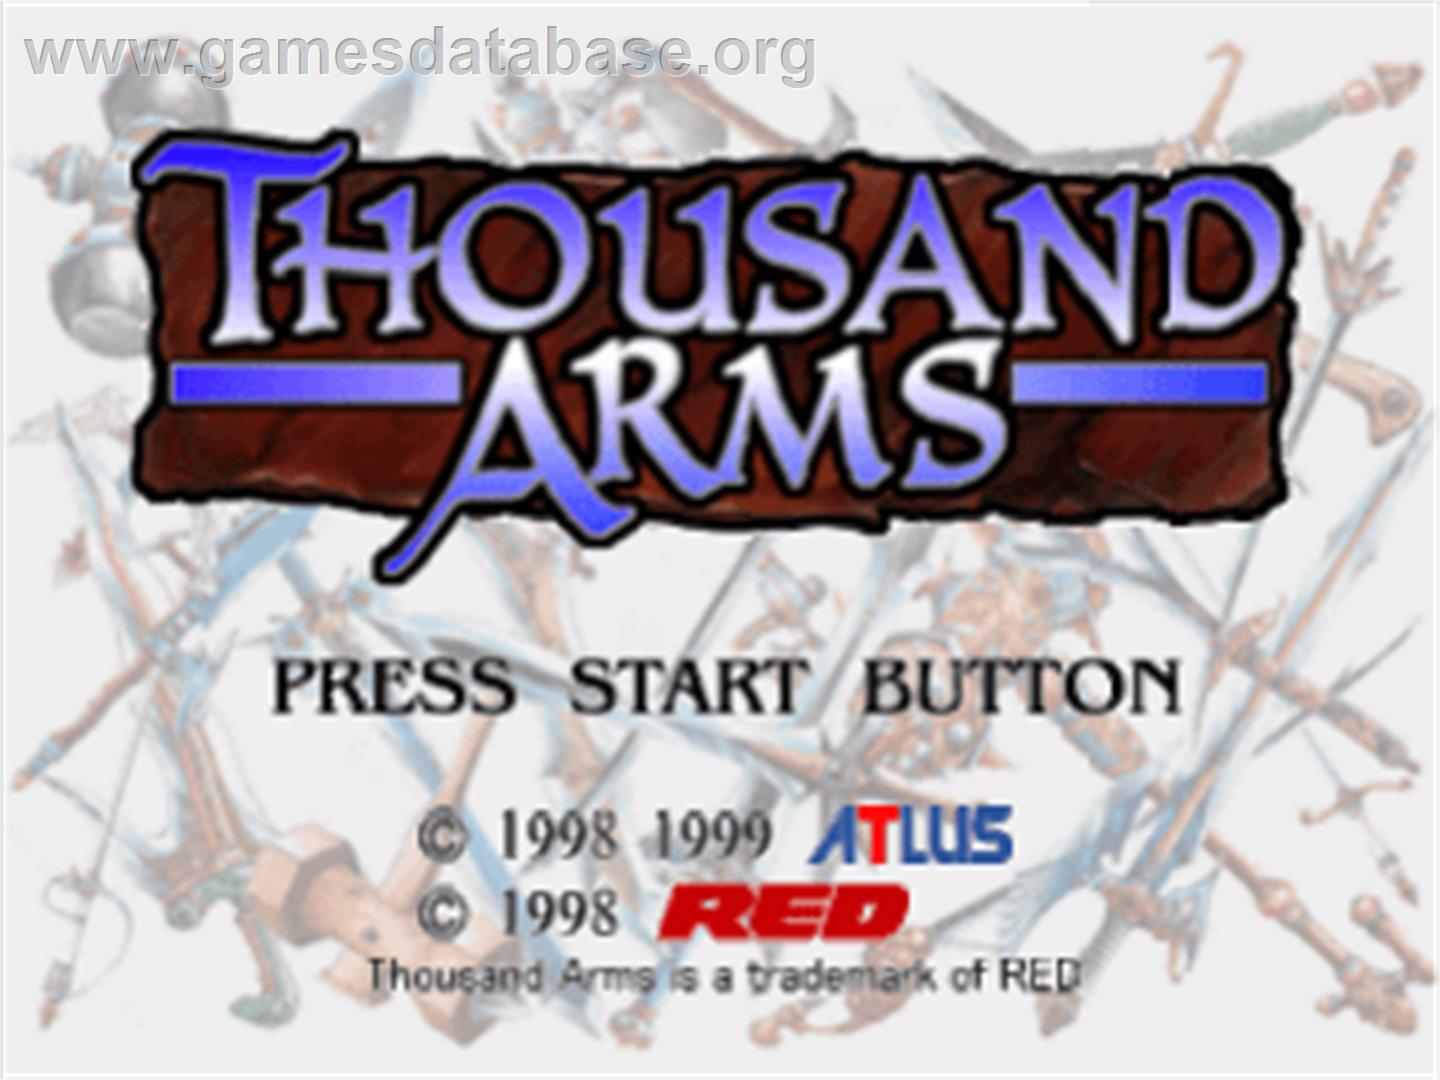 Thousand Arms - Sony Playstation - Artwork - Title Screen